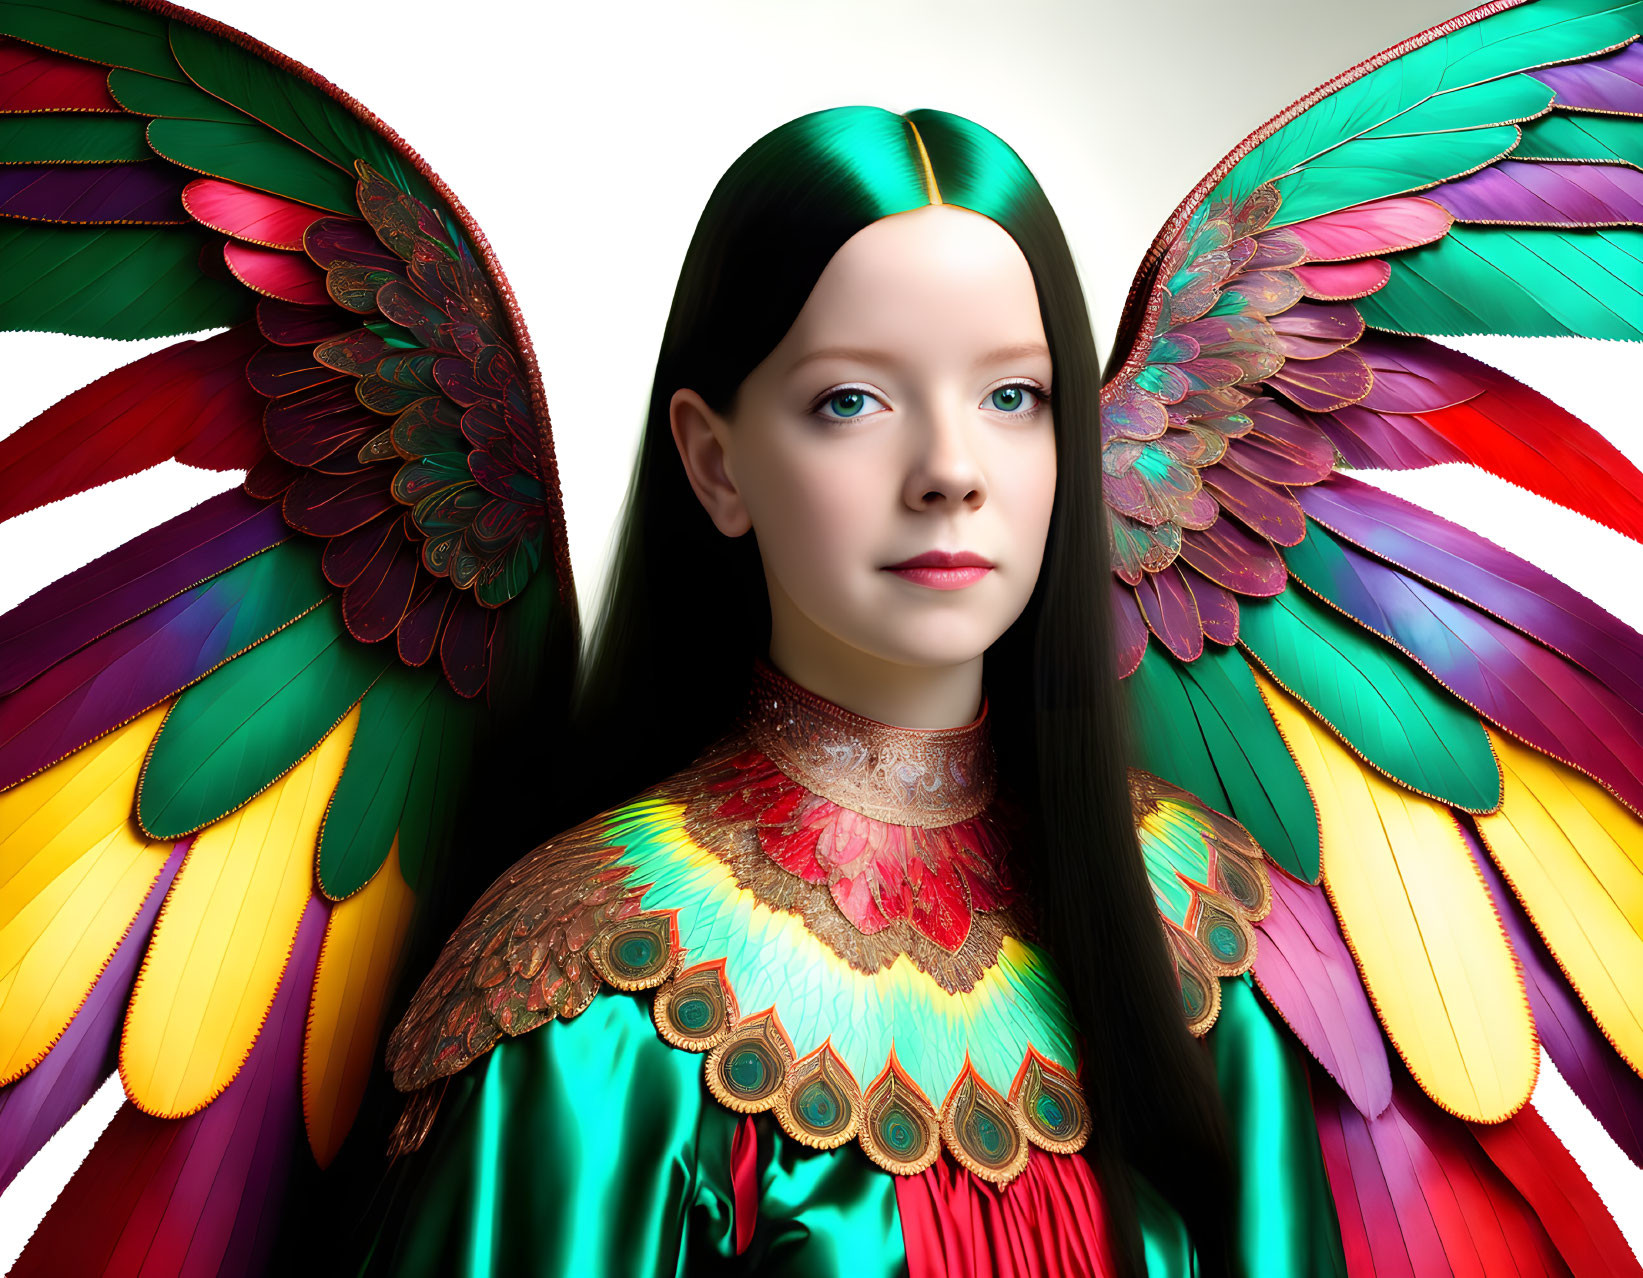 Vivid multicolored bird wings on a young girl in digital art